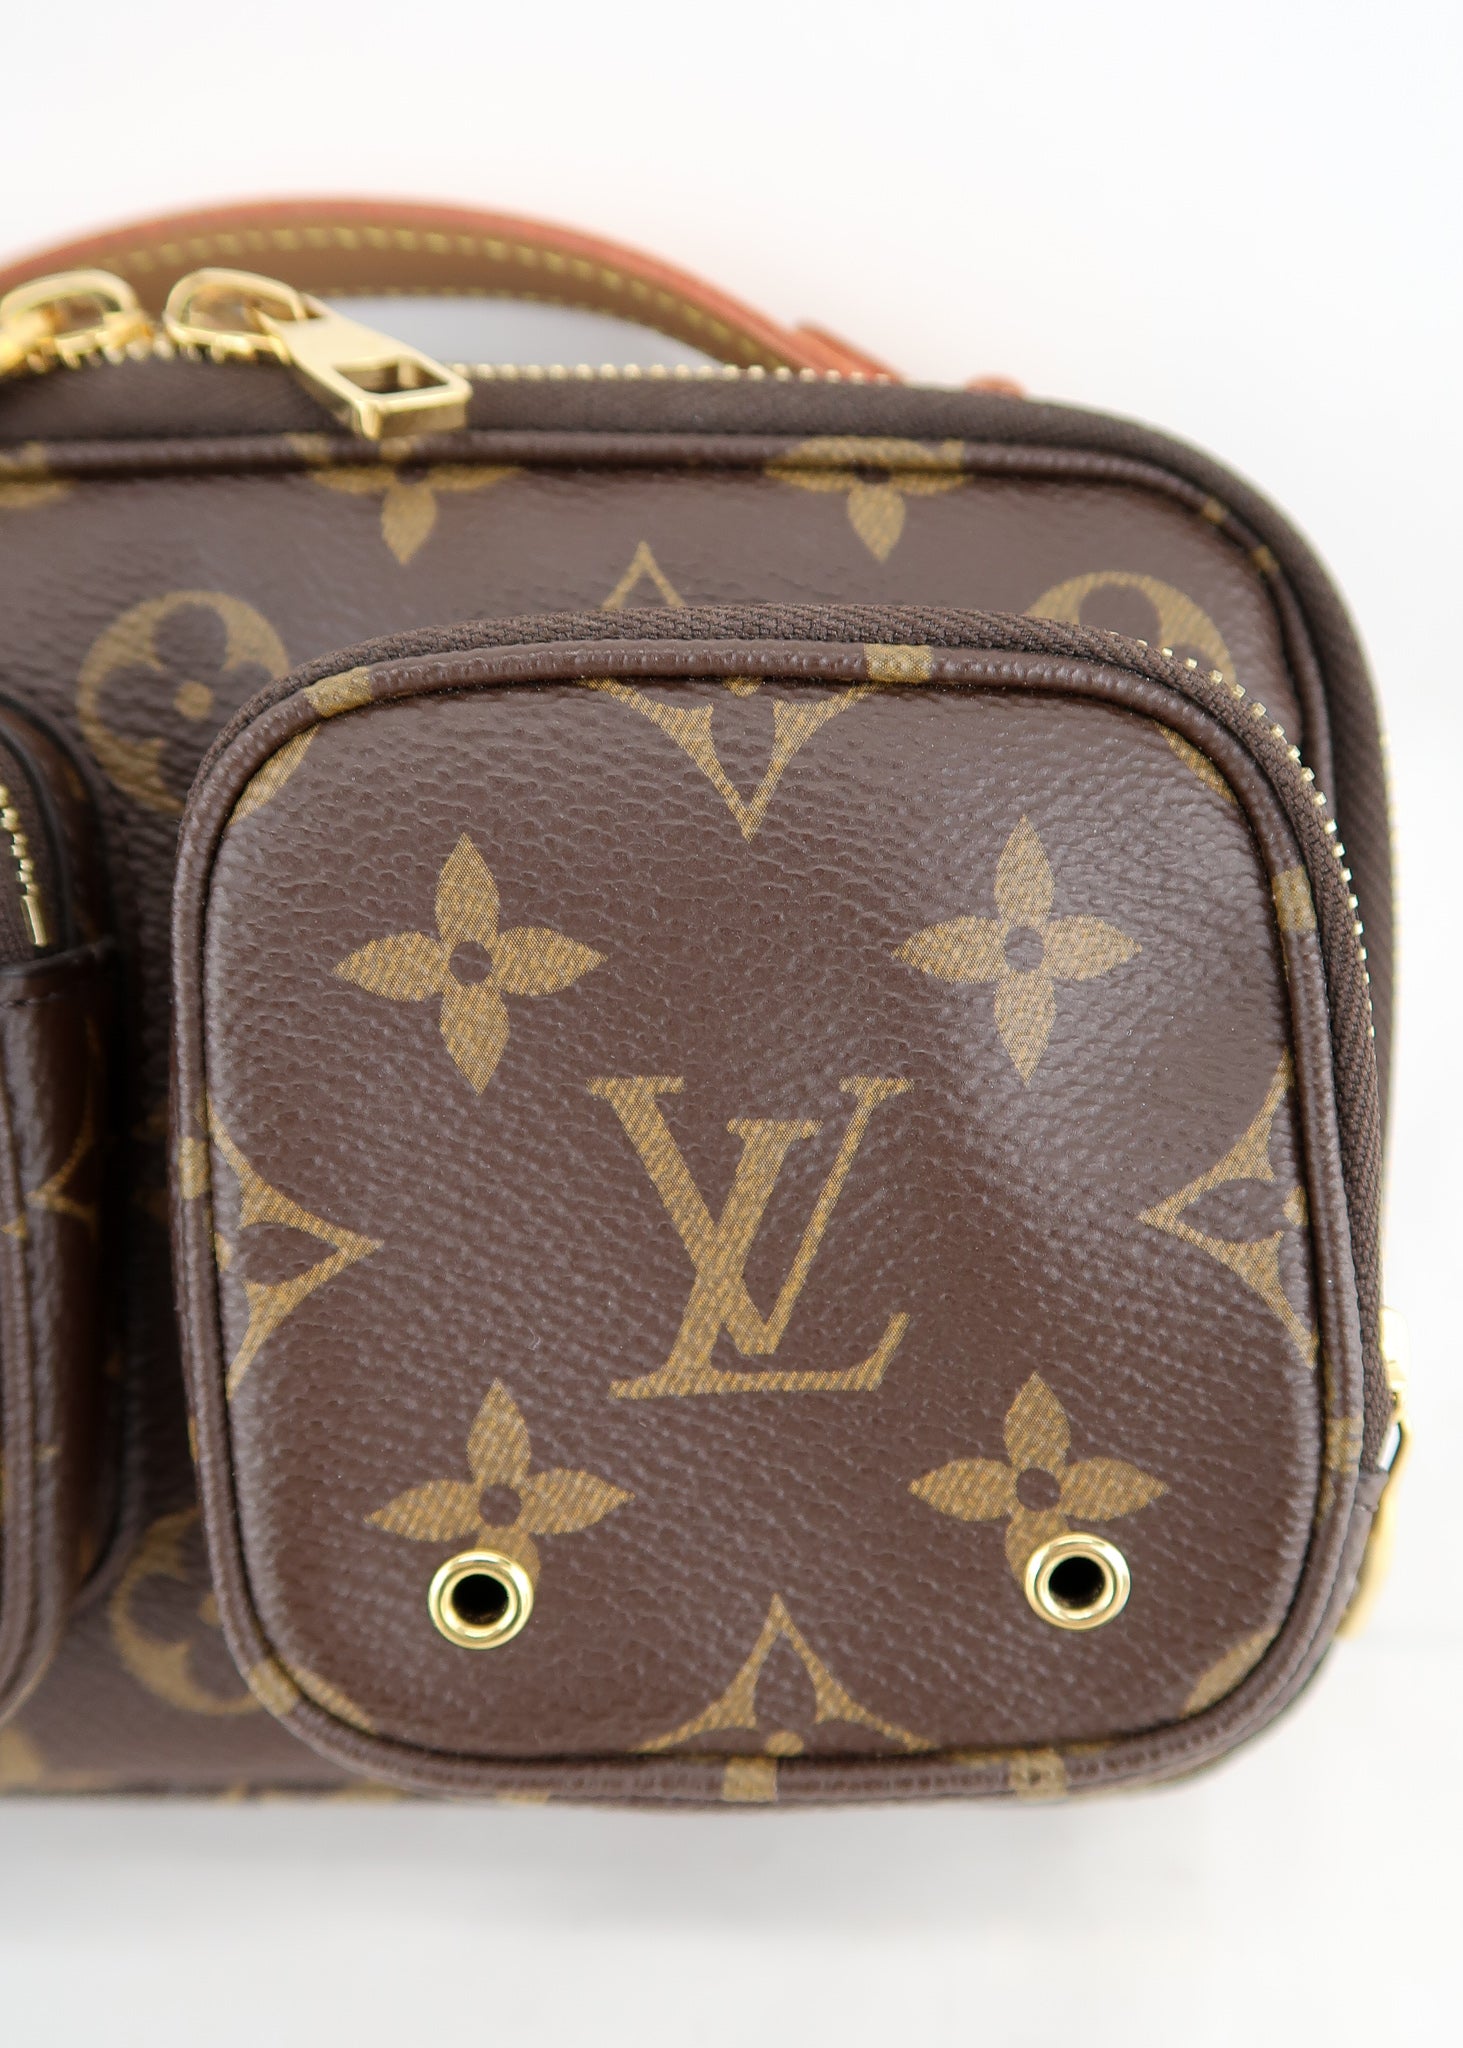 How to turn your LV wallet into a crossbody ☺️💕 #louisvuitton